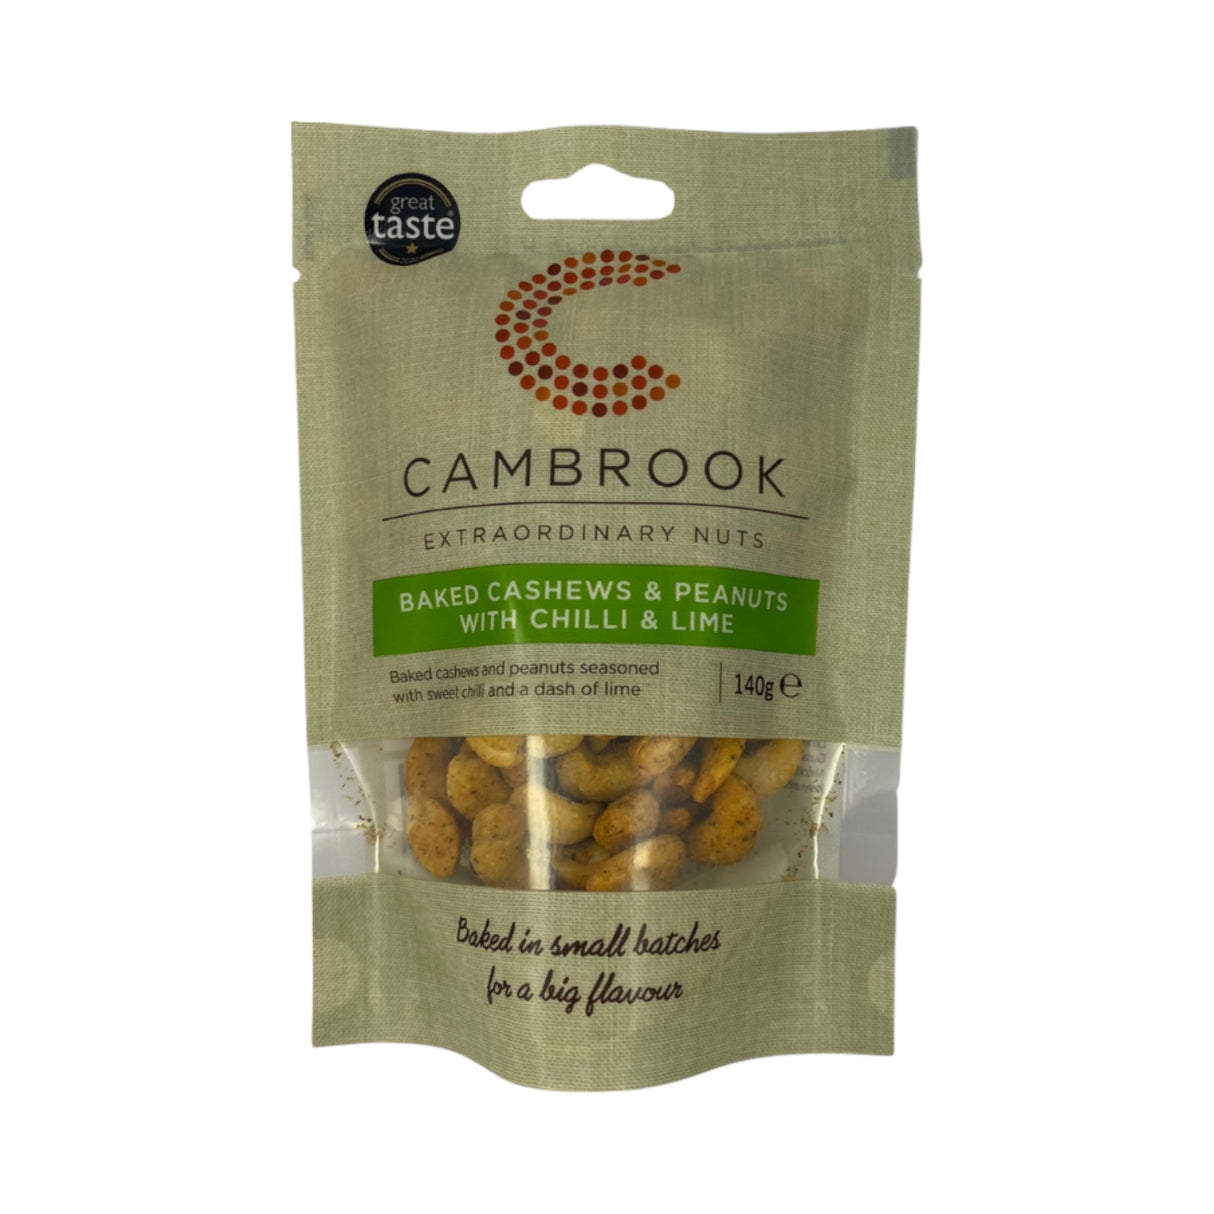 Cambrook - Baked Cashews & Peanuts With Chilli & Lime 140g